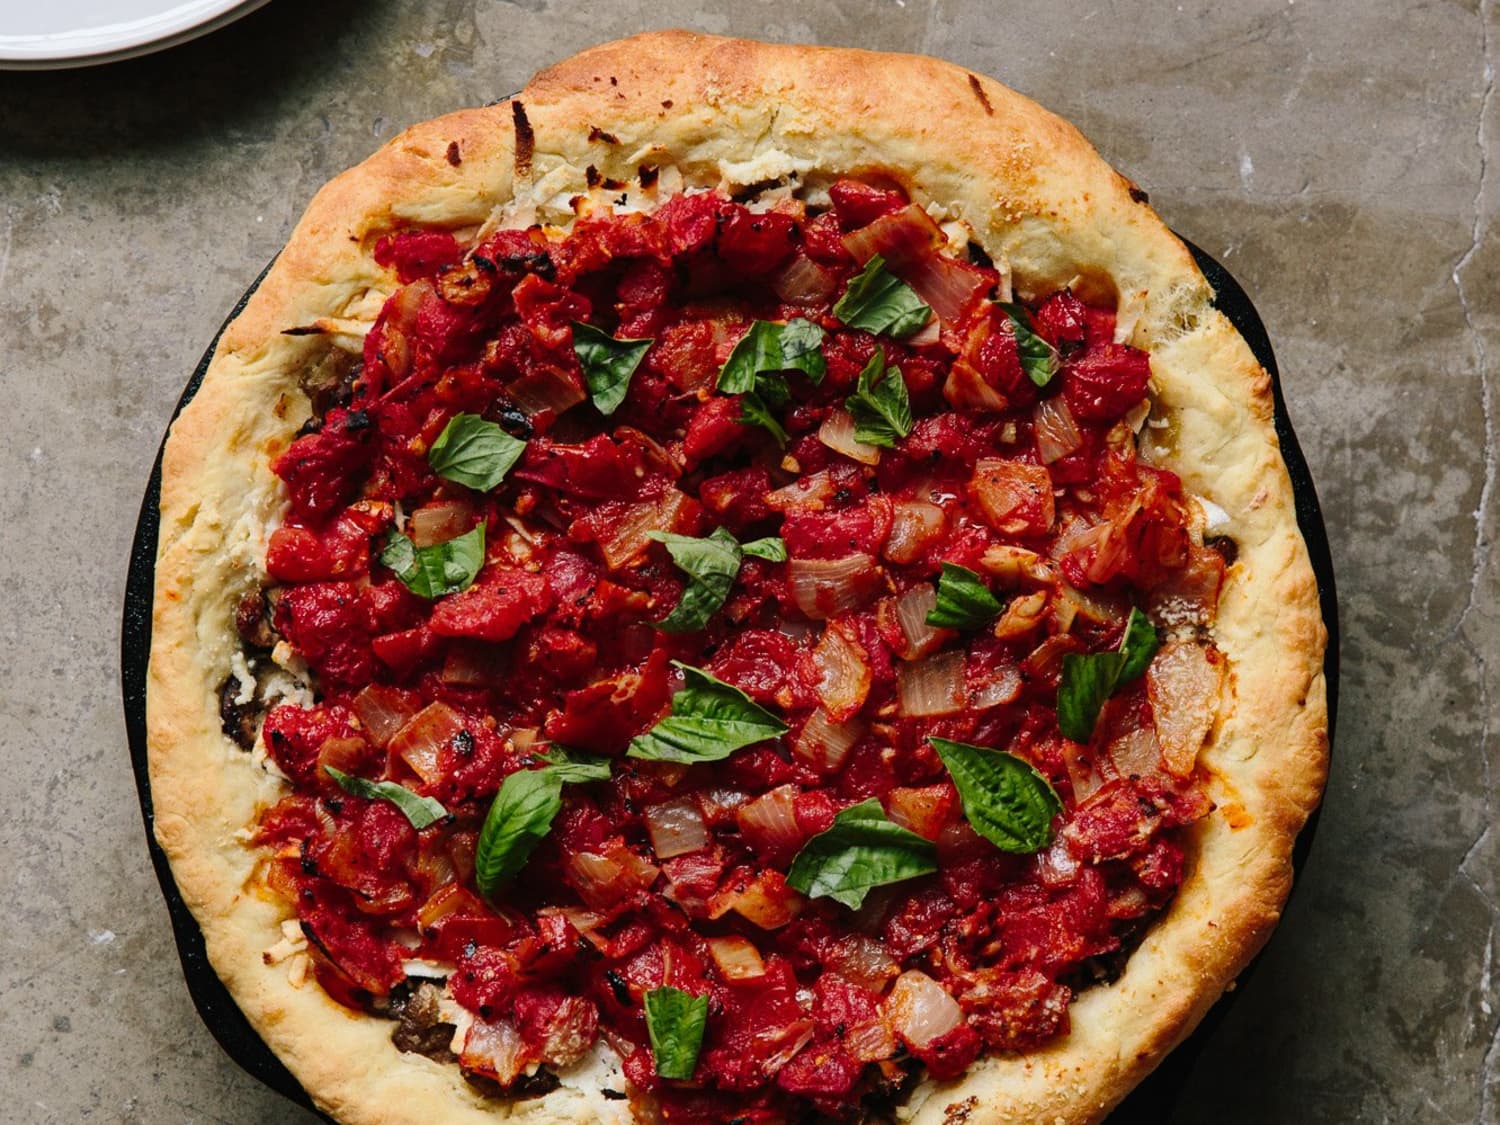 Baking School In-Depth: Chicago Deep-Dish Pizza - Bake from Scratch